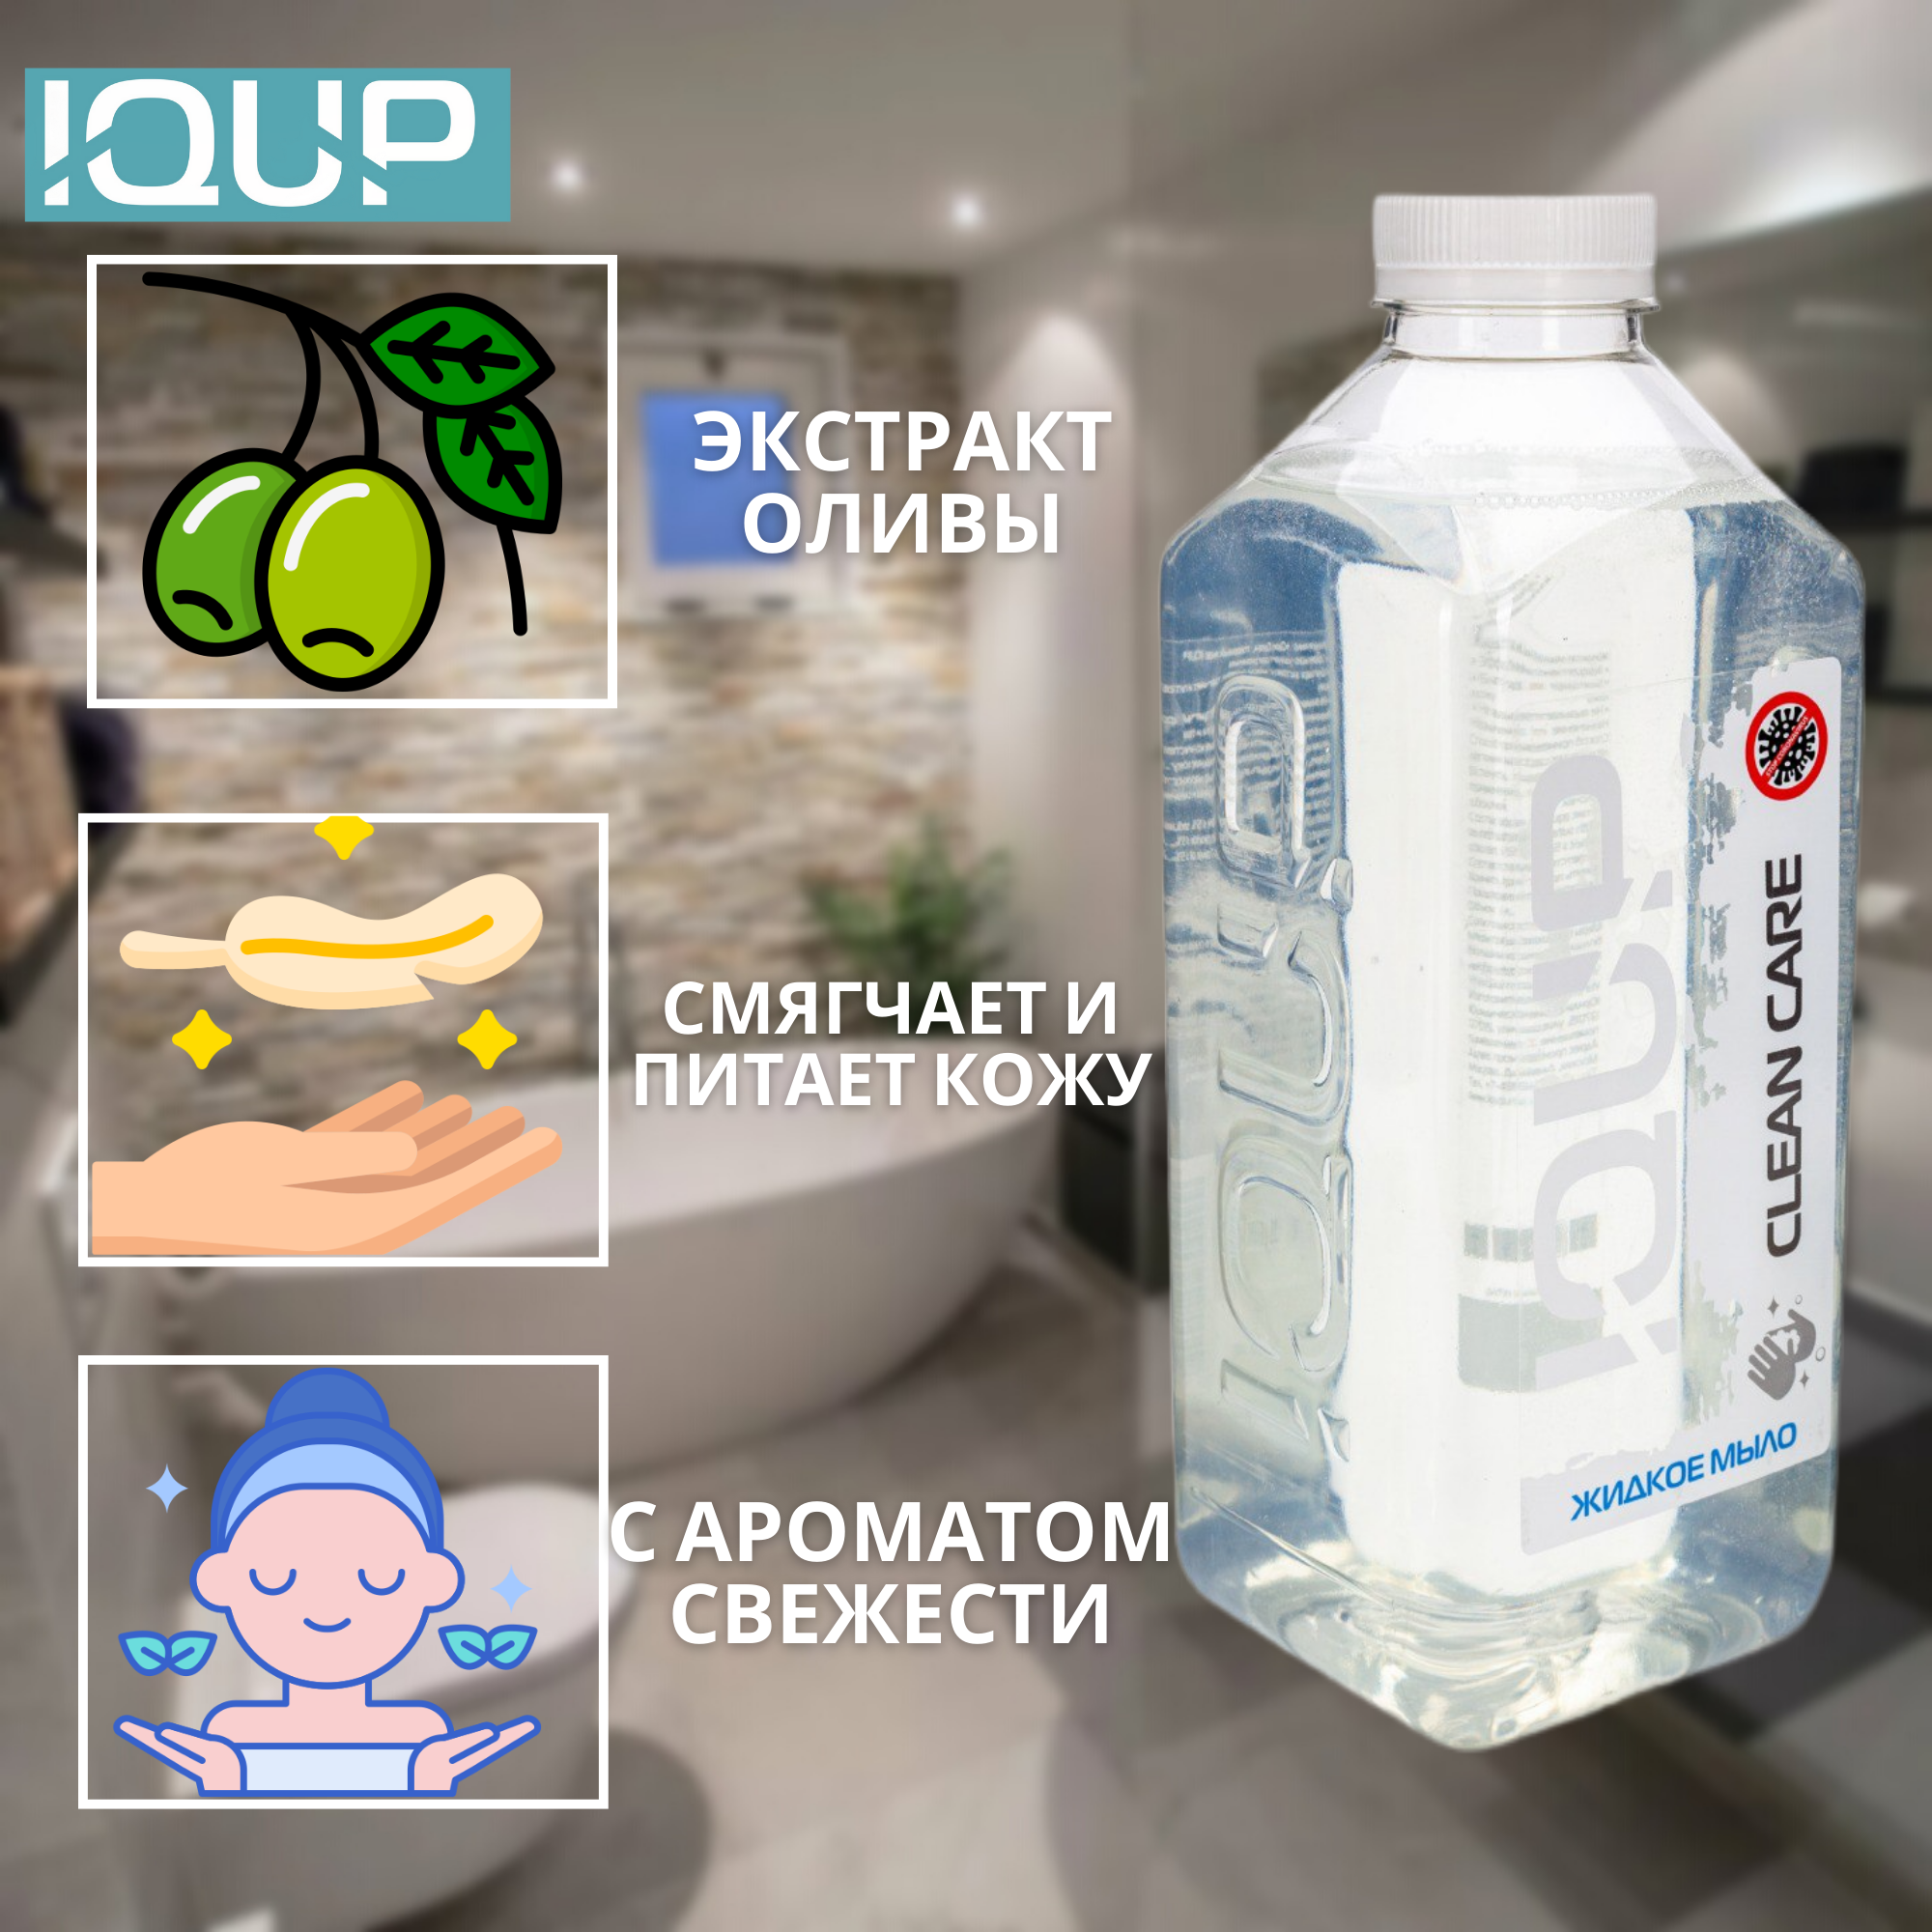 Жидкое мыло для рук IQUP Clean Care Crystal 1000 мл - фото 2